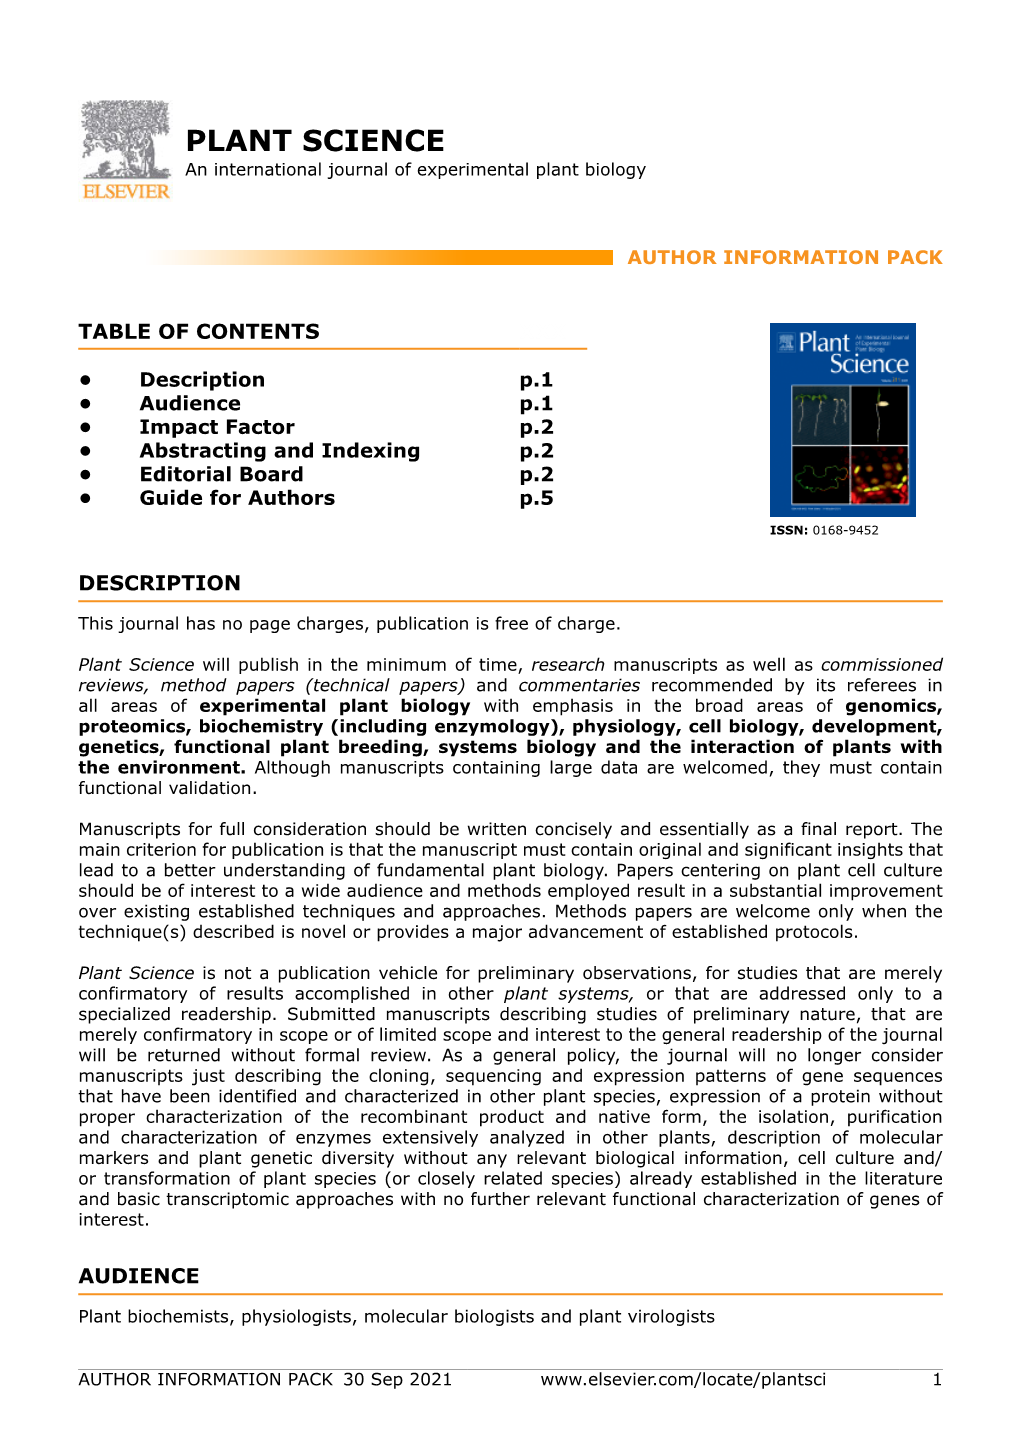 PLANT SCIENCE an International Journal of Experimental Plant Biology